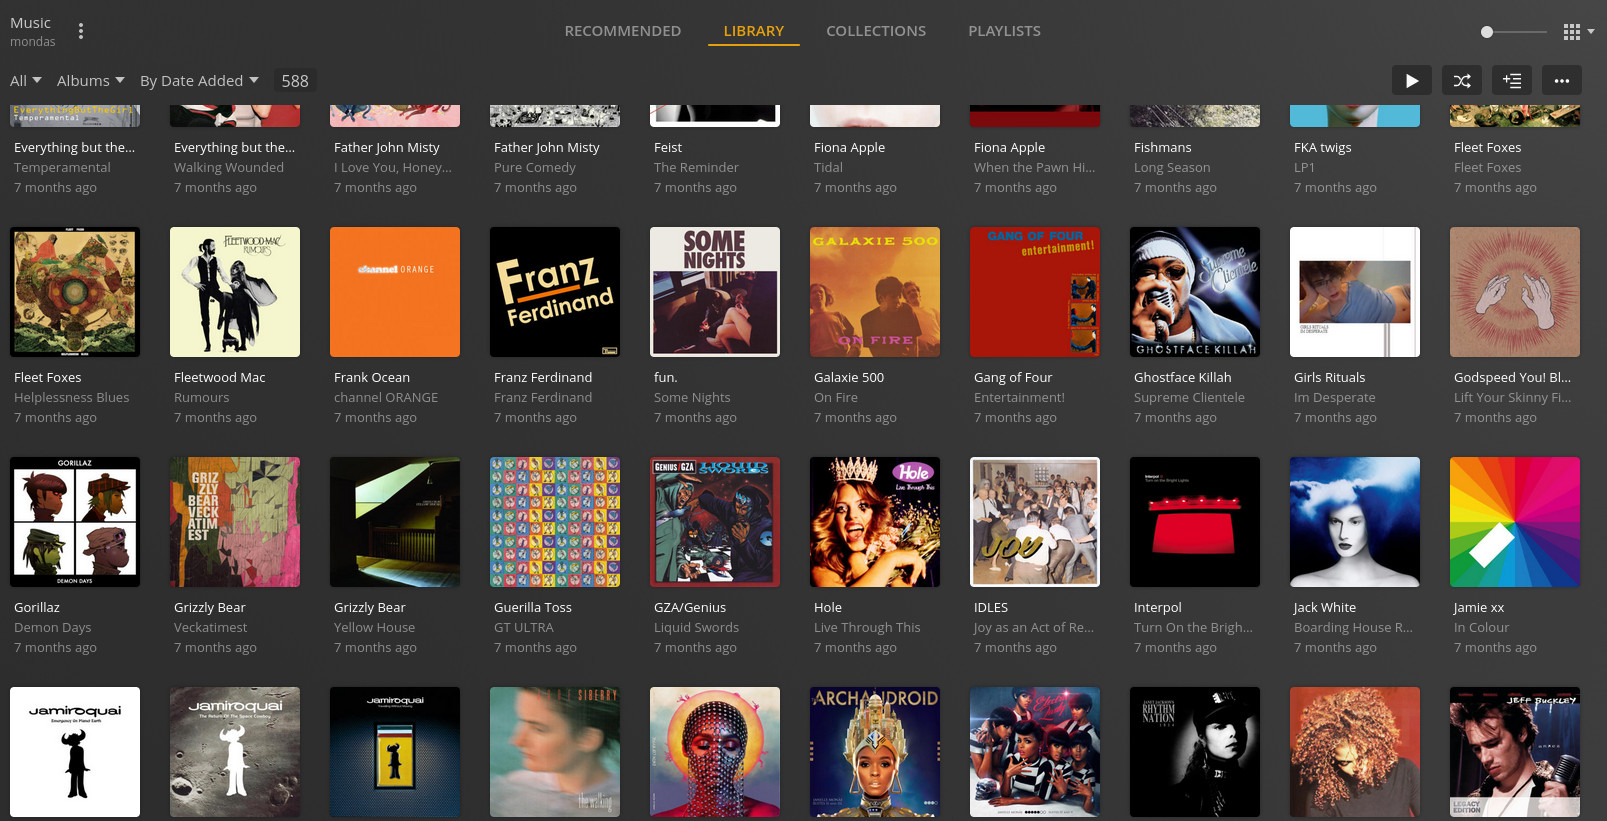 Plex's music library interface showing several different album covers along with artists and titles.